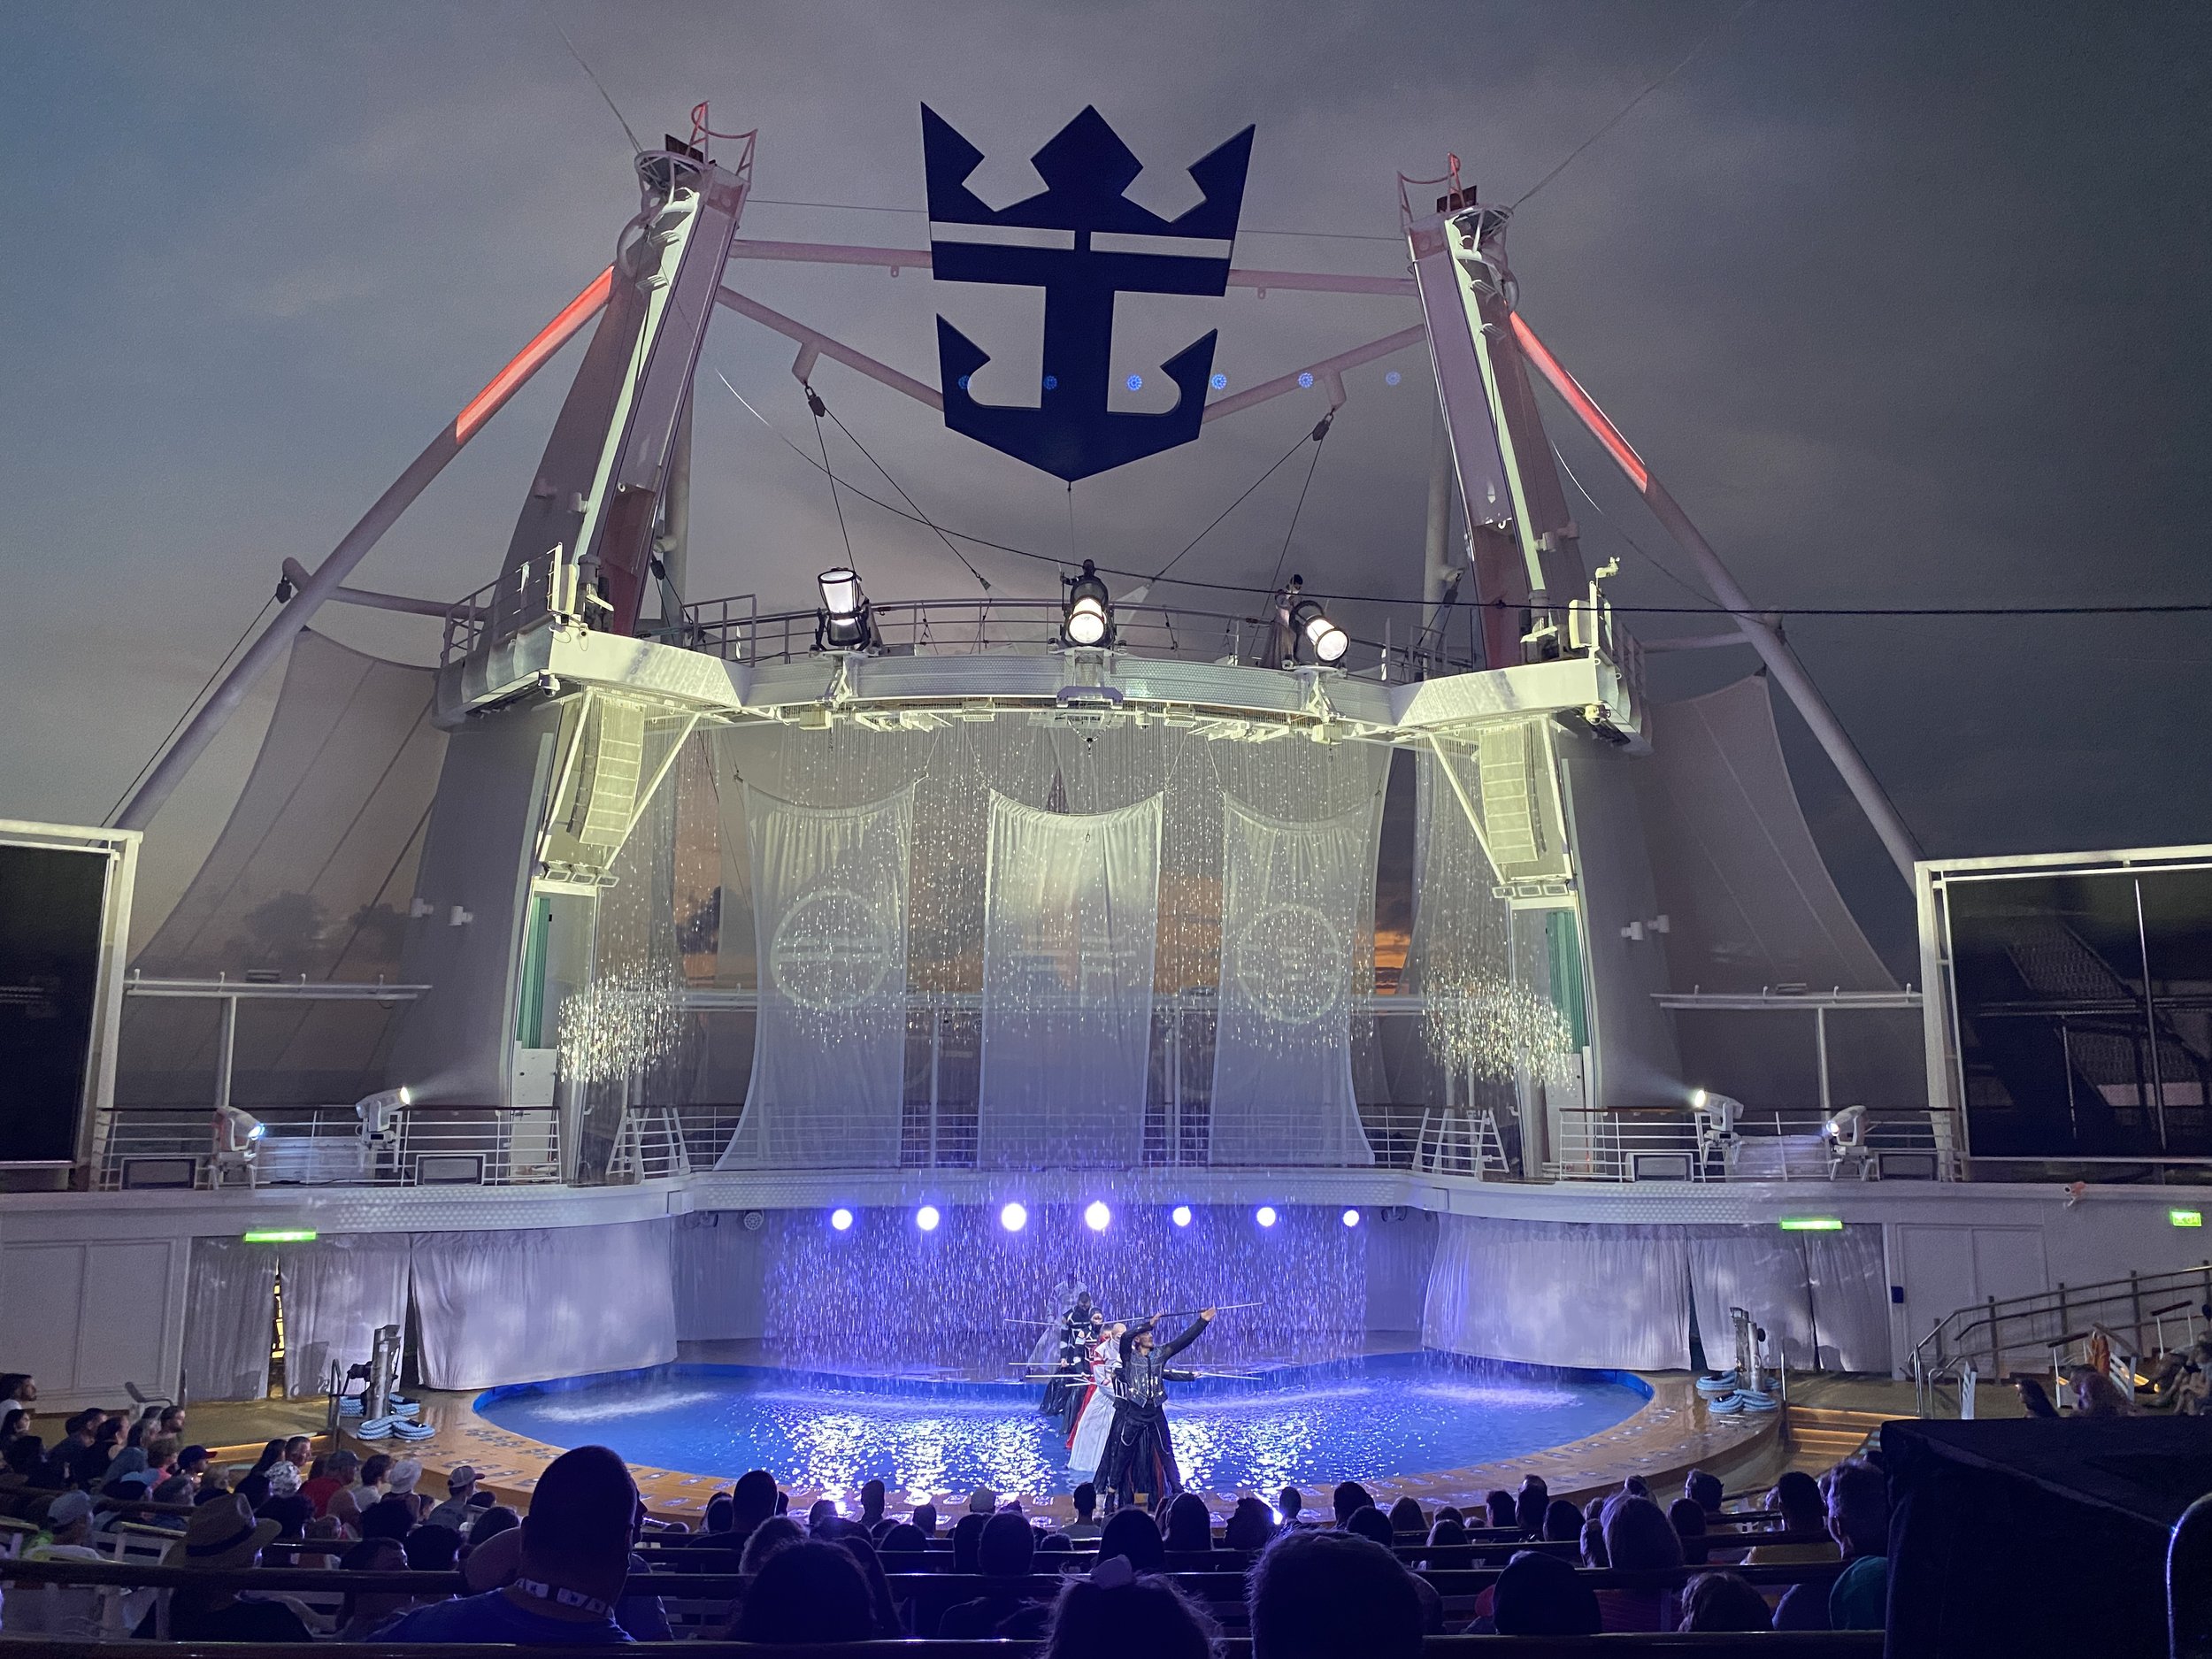  This is the theater in the rear (aft) of the ship where the show,  Hiro  is performed. Think Cirque du Soleil show on a ship. Breathtaking acrobat performances, high dives, dancers, and high-energy music. Tickets are required to see show but there i